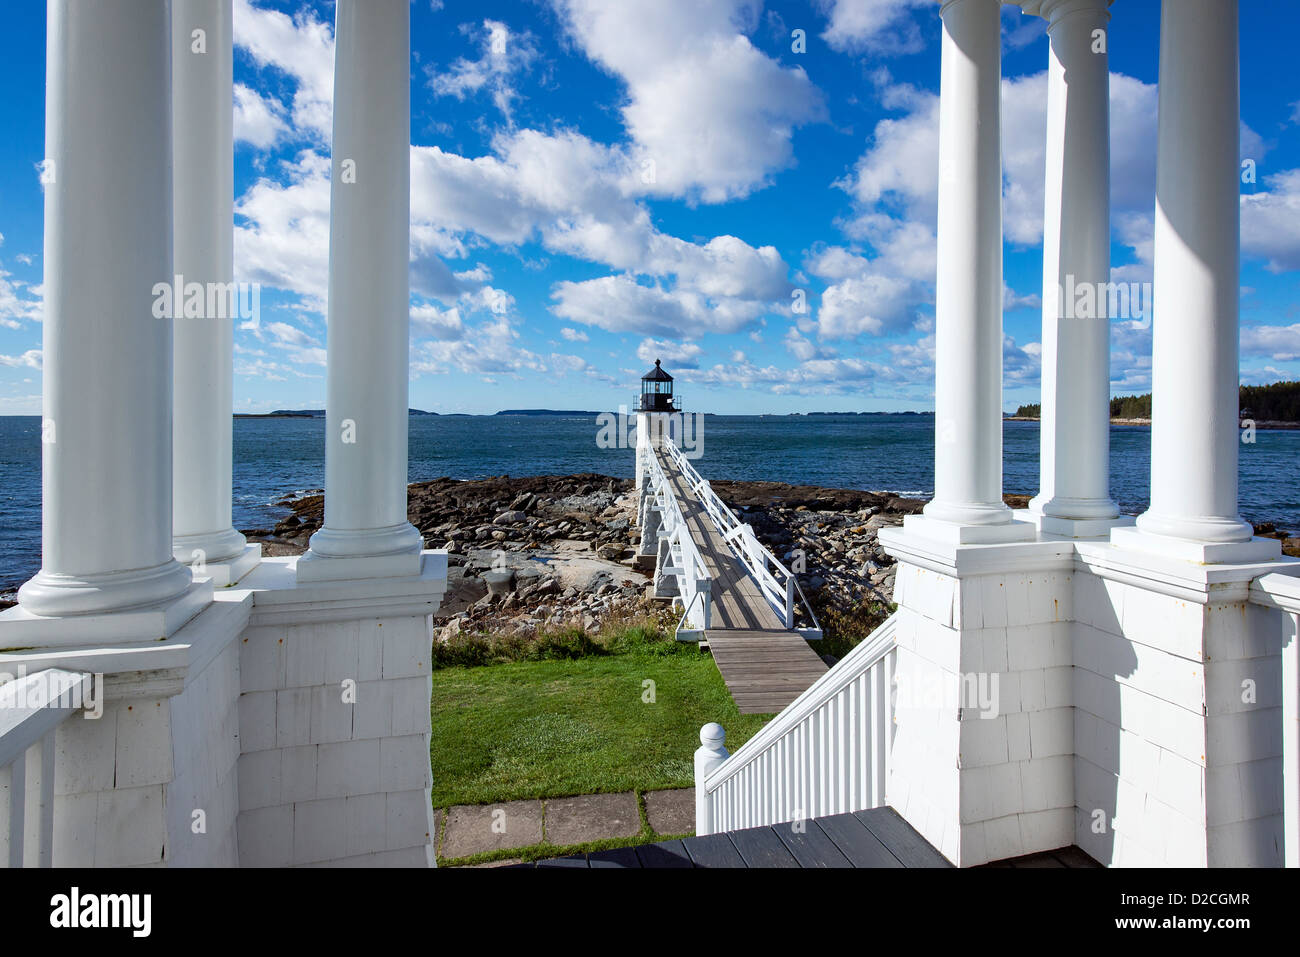 Marshall Point Lighthouse, Port Clyde, Maine, USA Banque D'Images